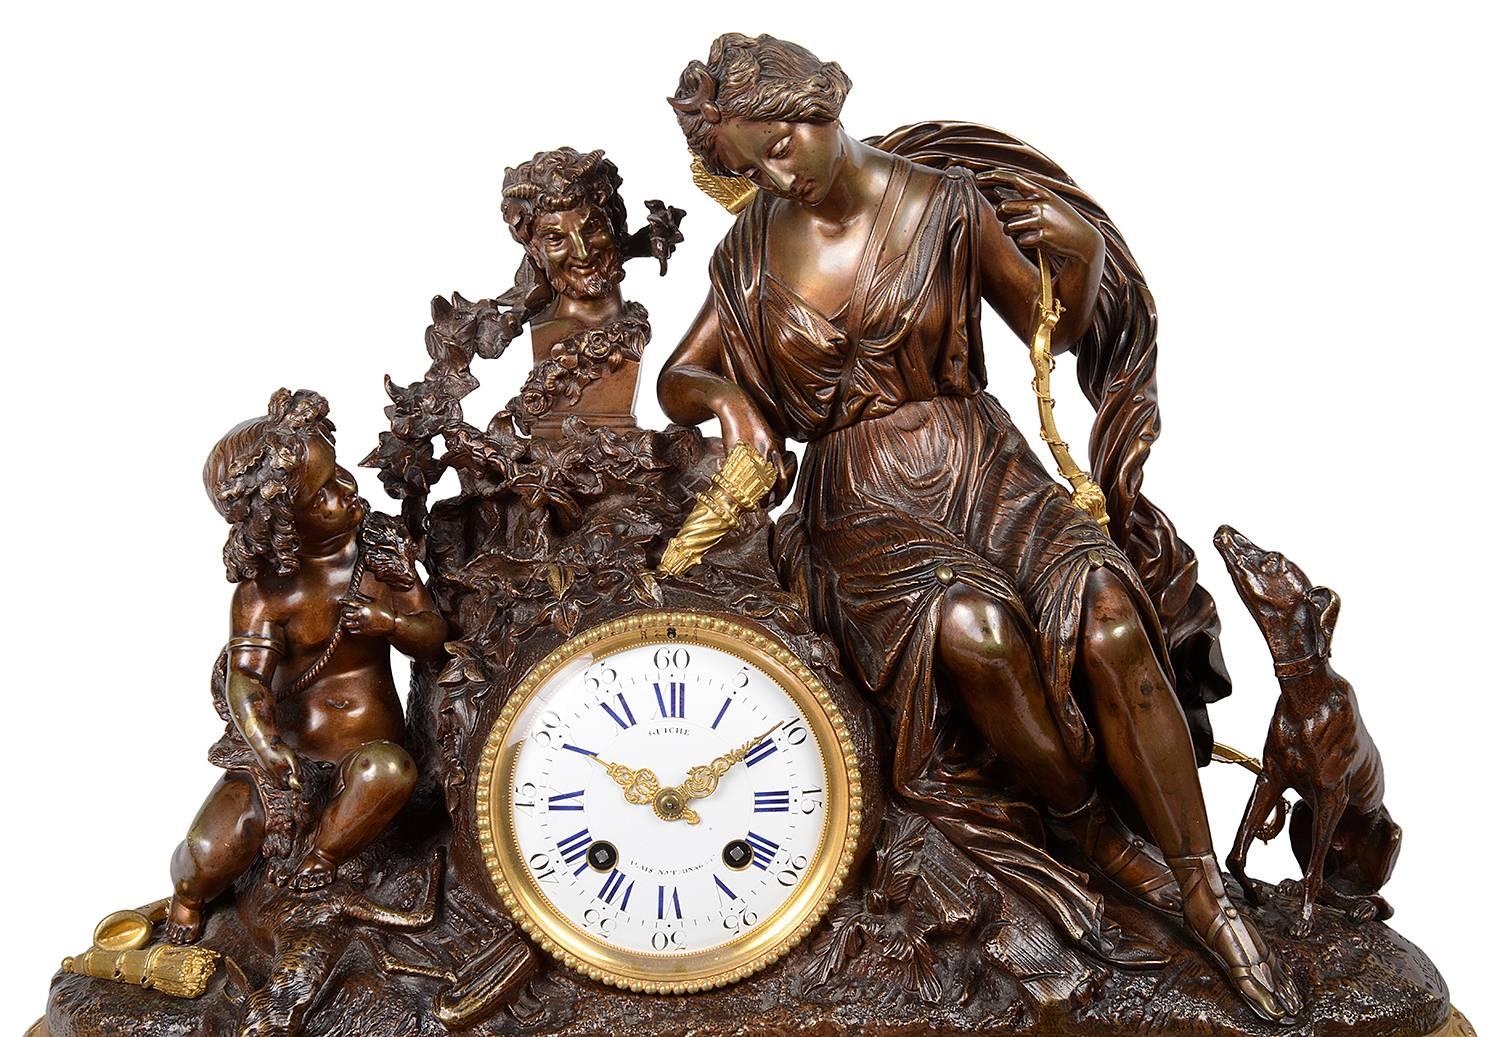 A large and impressive, good quality 19th century French Louis XVI style gilded ormolu and bronze clock set. Having a mother and child mounted above the clock, which has an eight day, hour and half hour striking movement, signed; Guiche, Palais